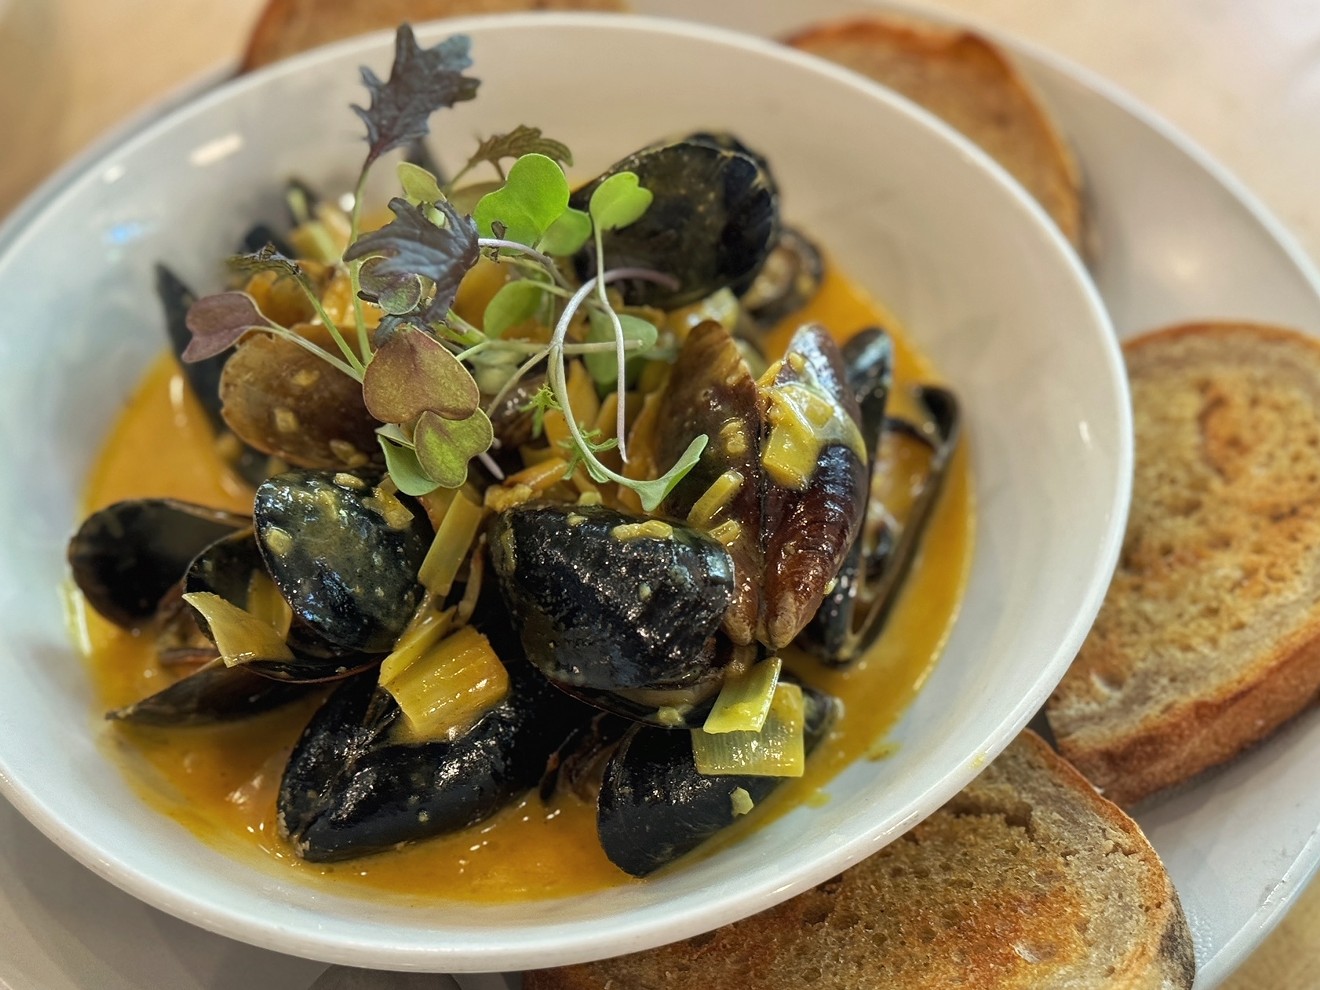 Mussels with melted leeks in a rich butter broth with turmeric at Sachet is typical of the dishes often served at a Feast of Seven Fishes Christmas Eve meal.